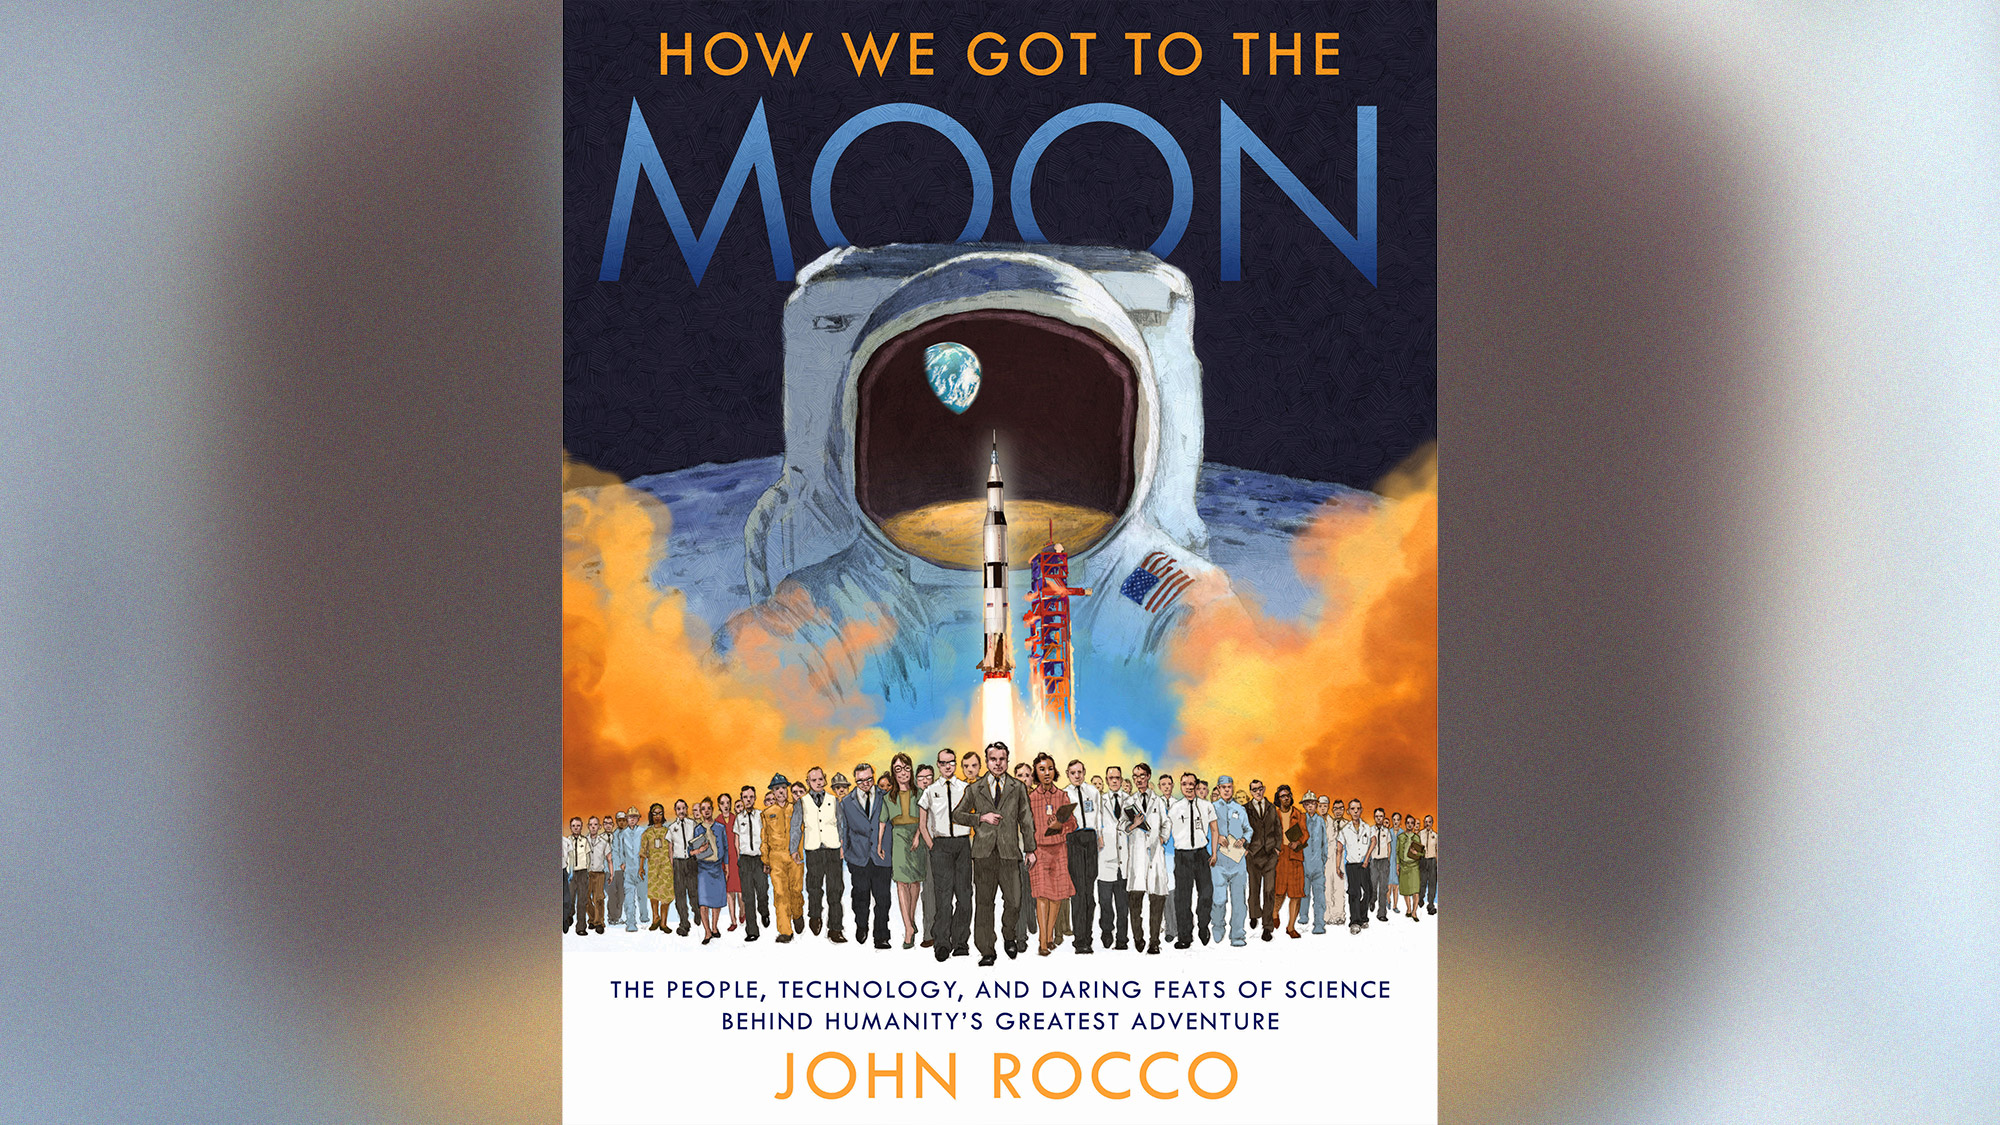 Let's Go to the Moon [Book]